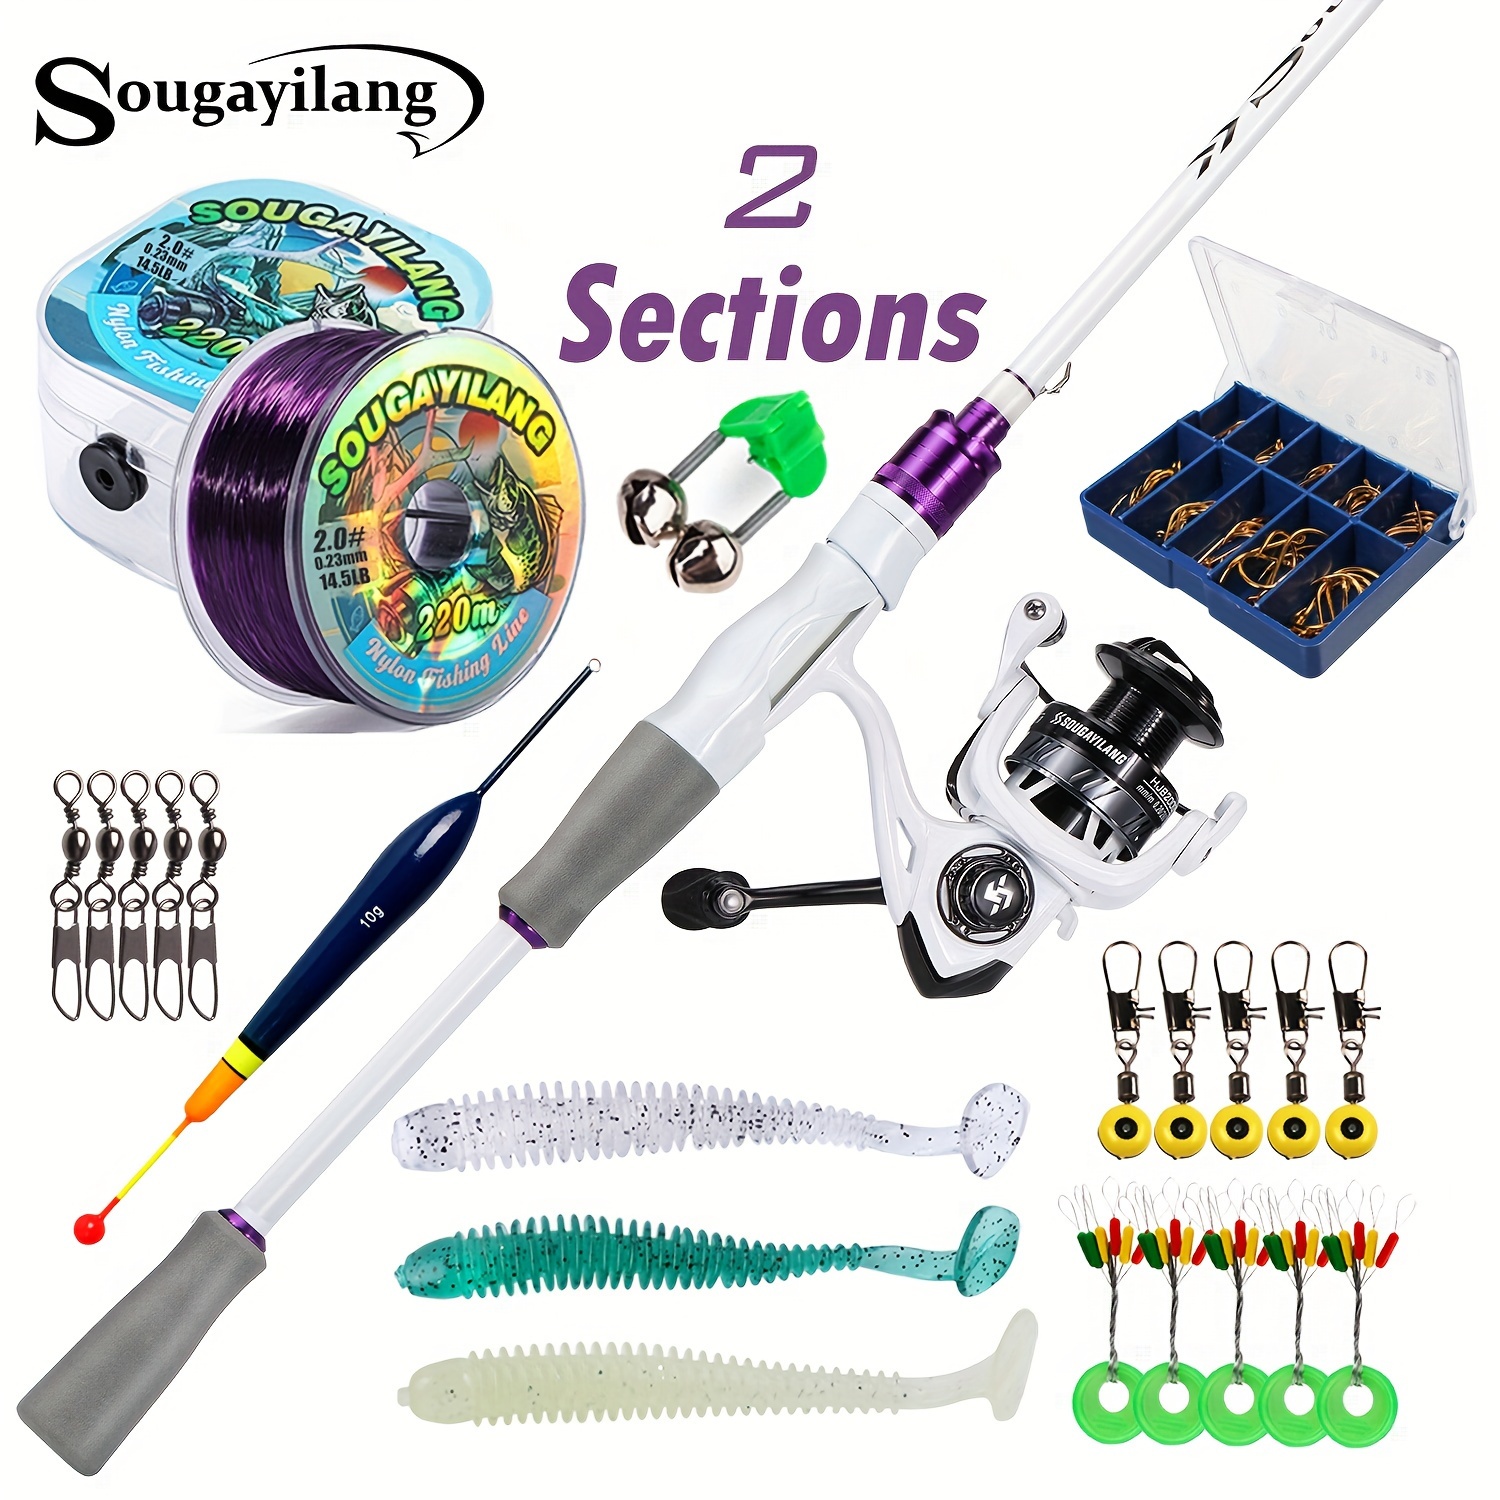 Sougayilang 2 Sections Fishing Rod And Reel Combo, Ultralight Carbon Fiber  Spinning Rod, 11+1 BB Fishing Reel With EVA Handle, Fishing Line Baits Set